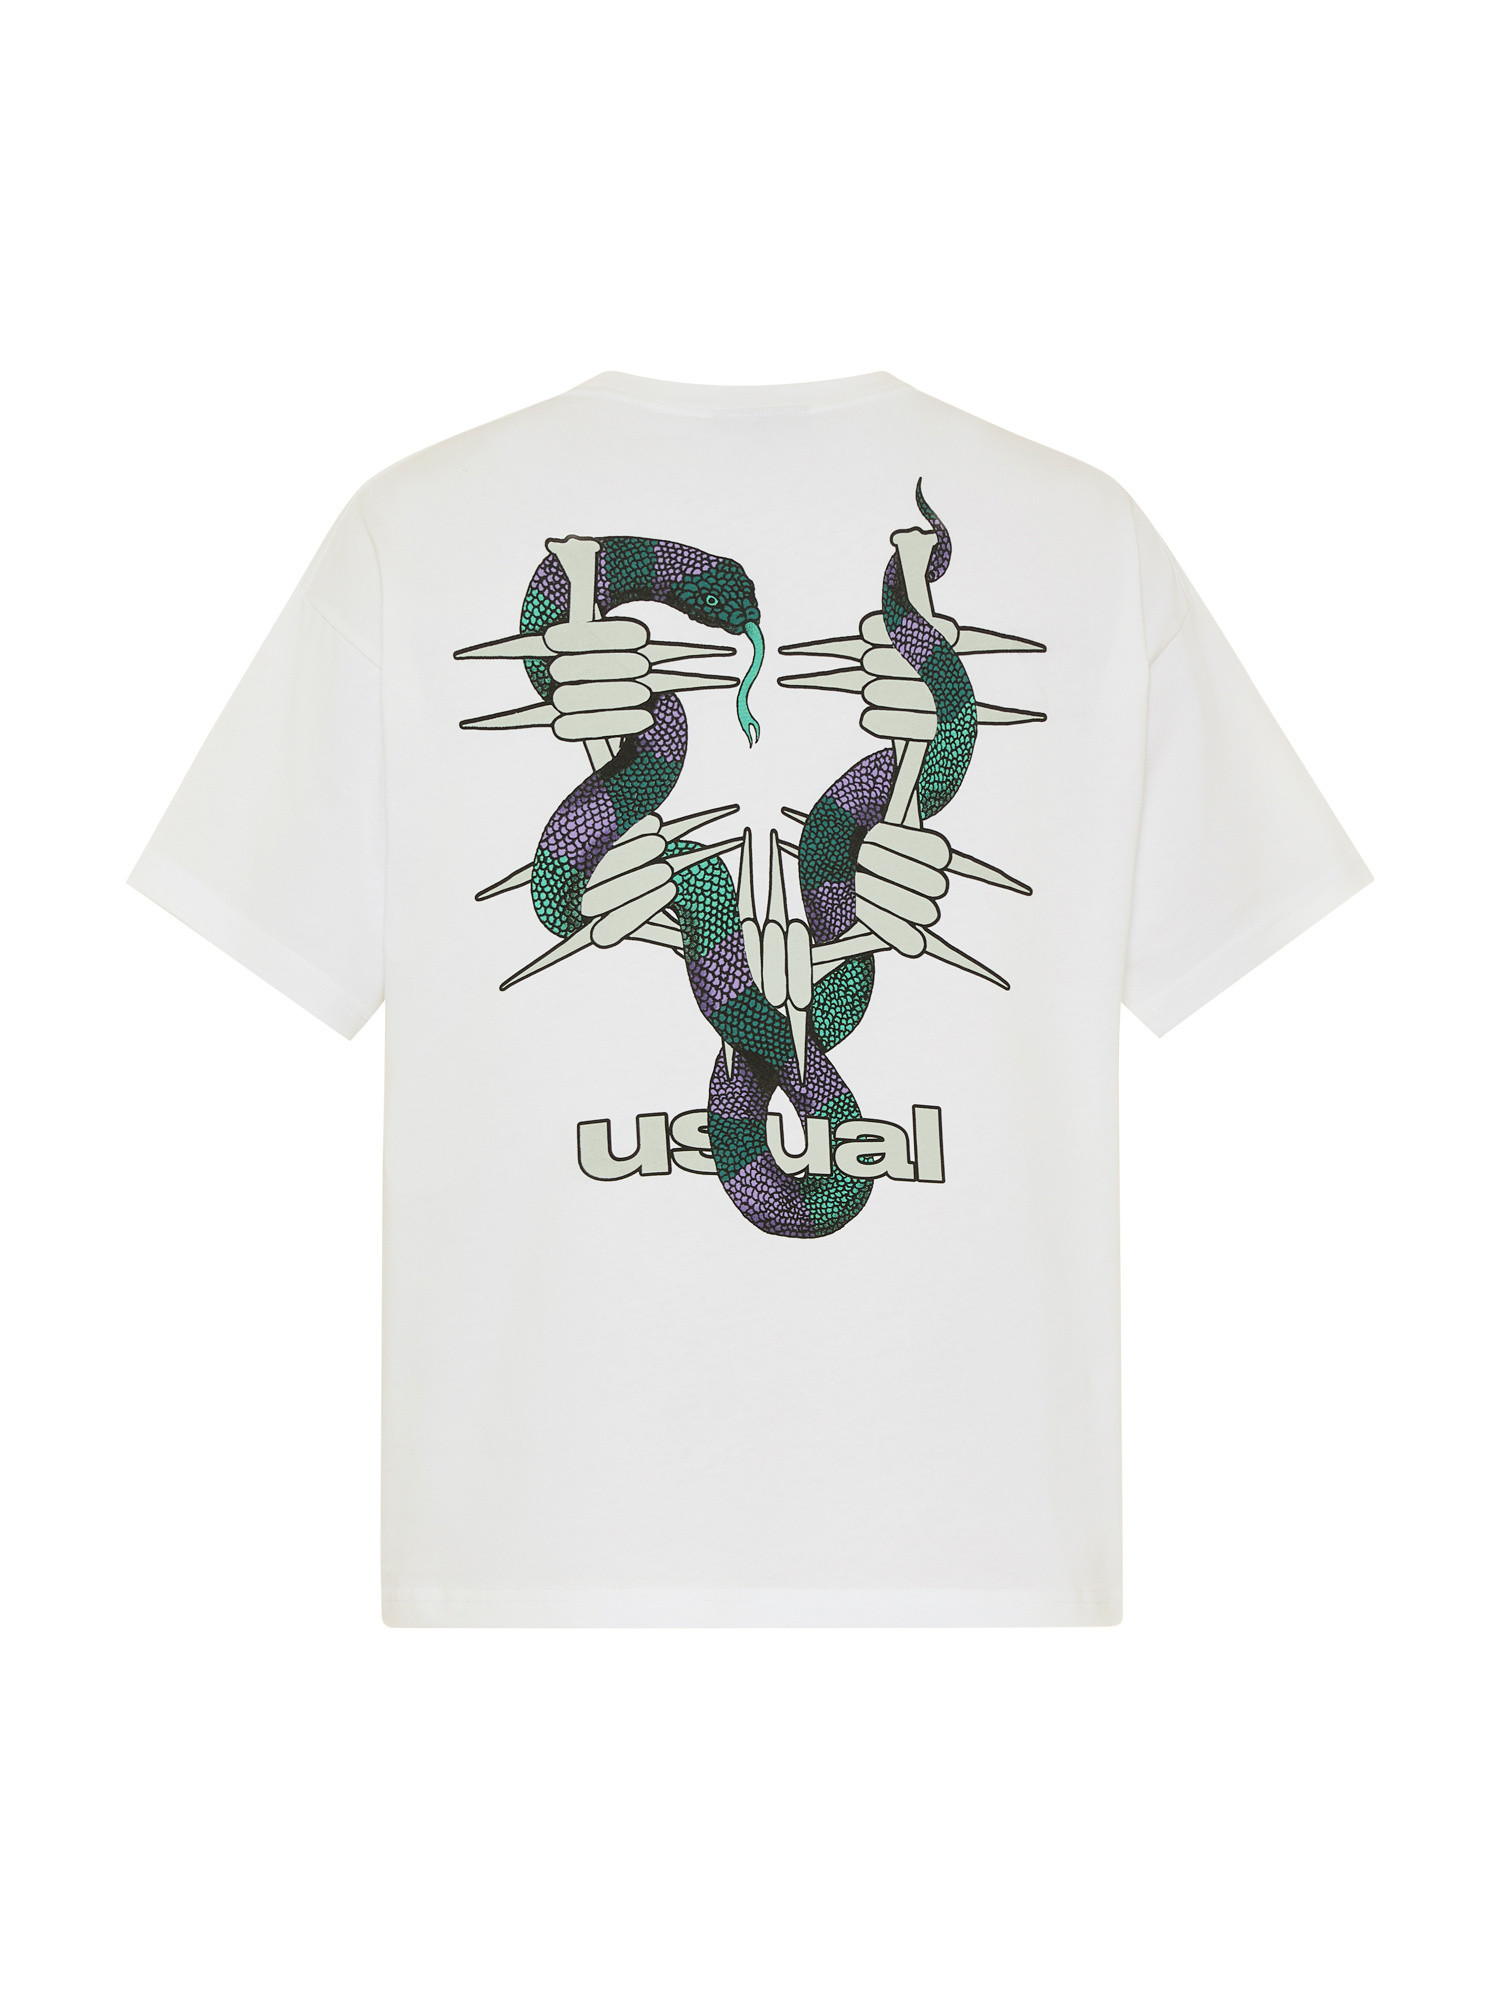 Usual - T-Shirt manica corta Poison, Bianco, large image number 1